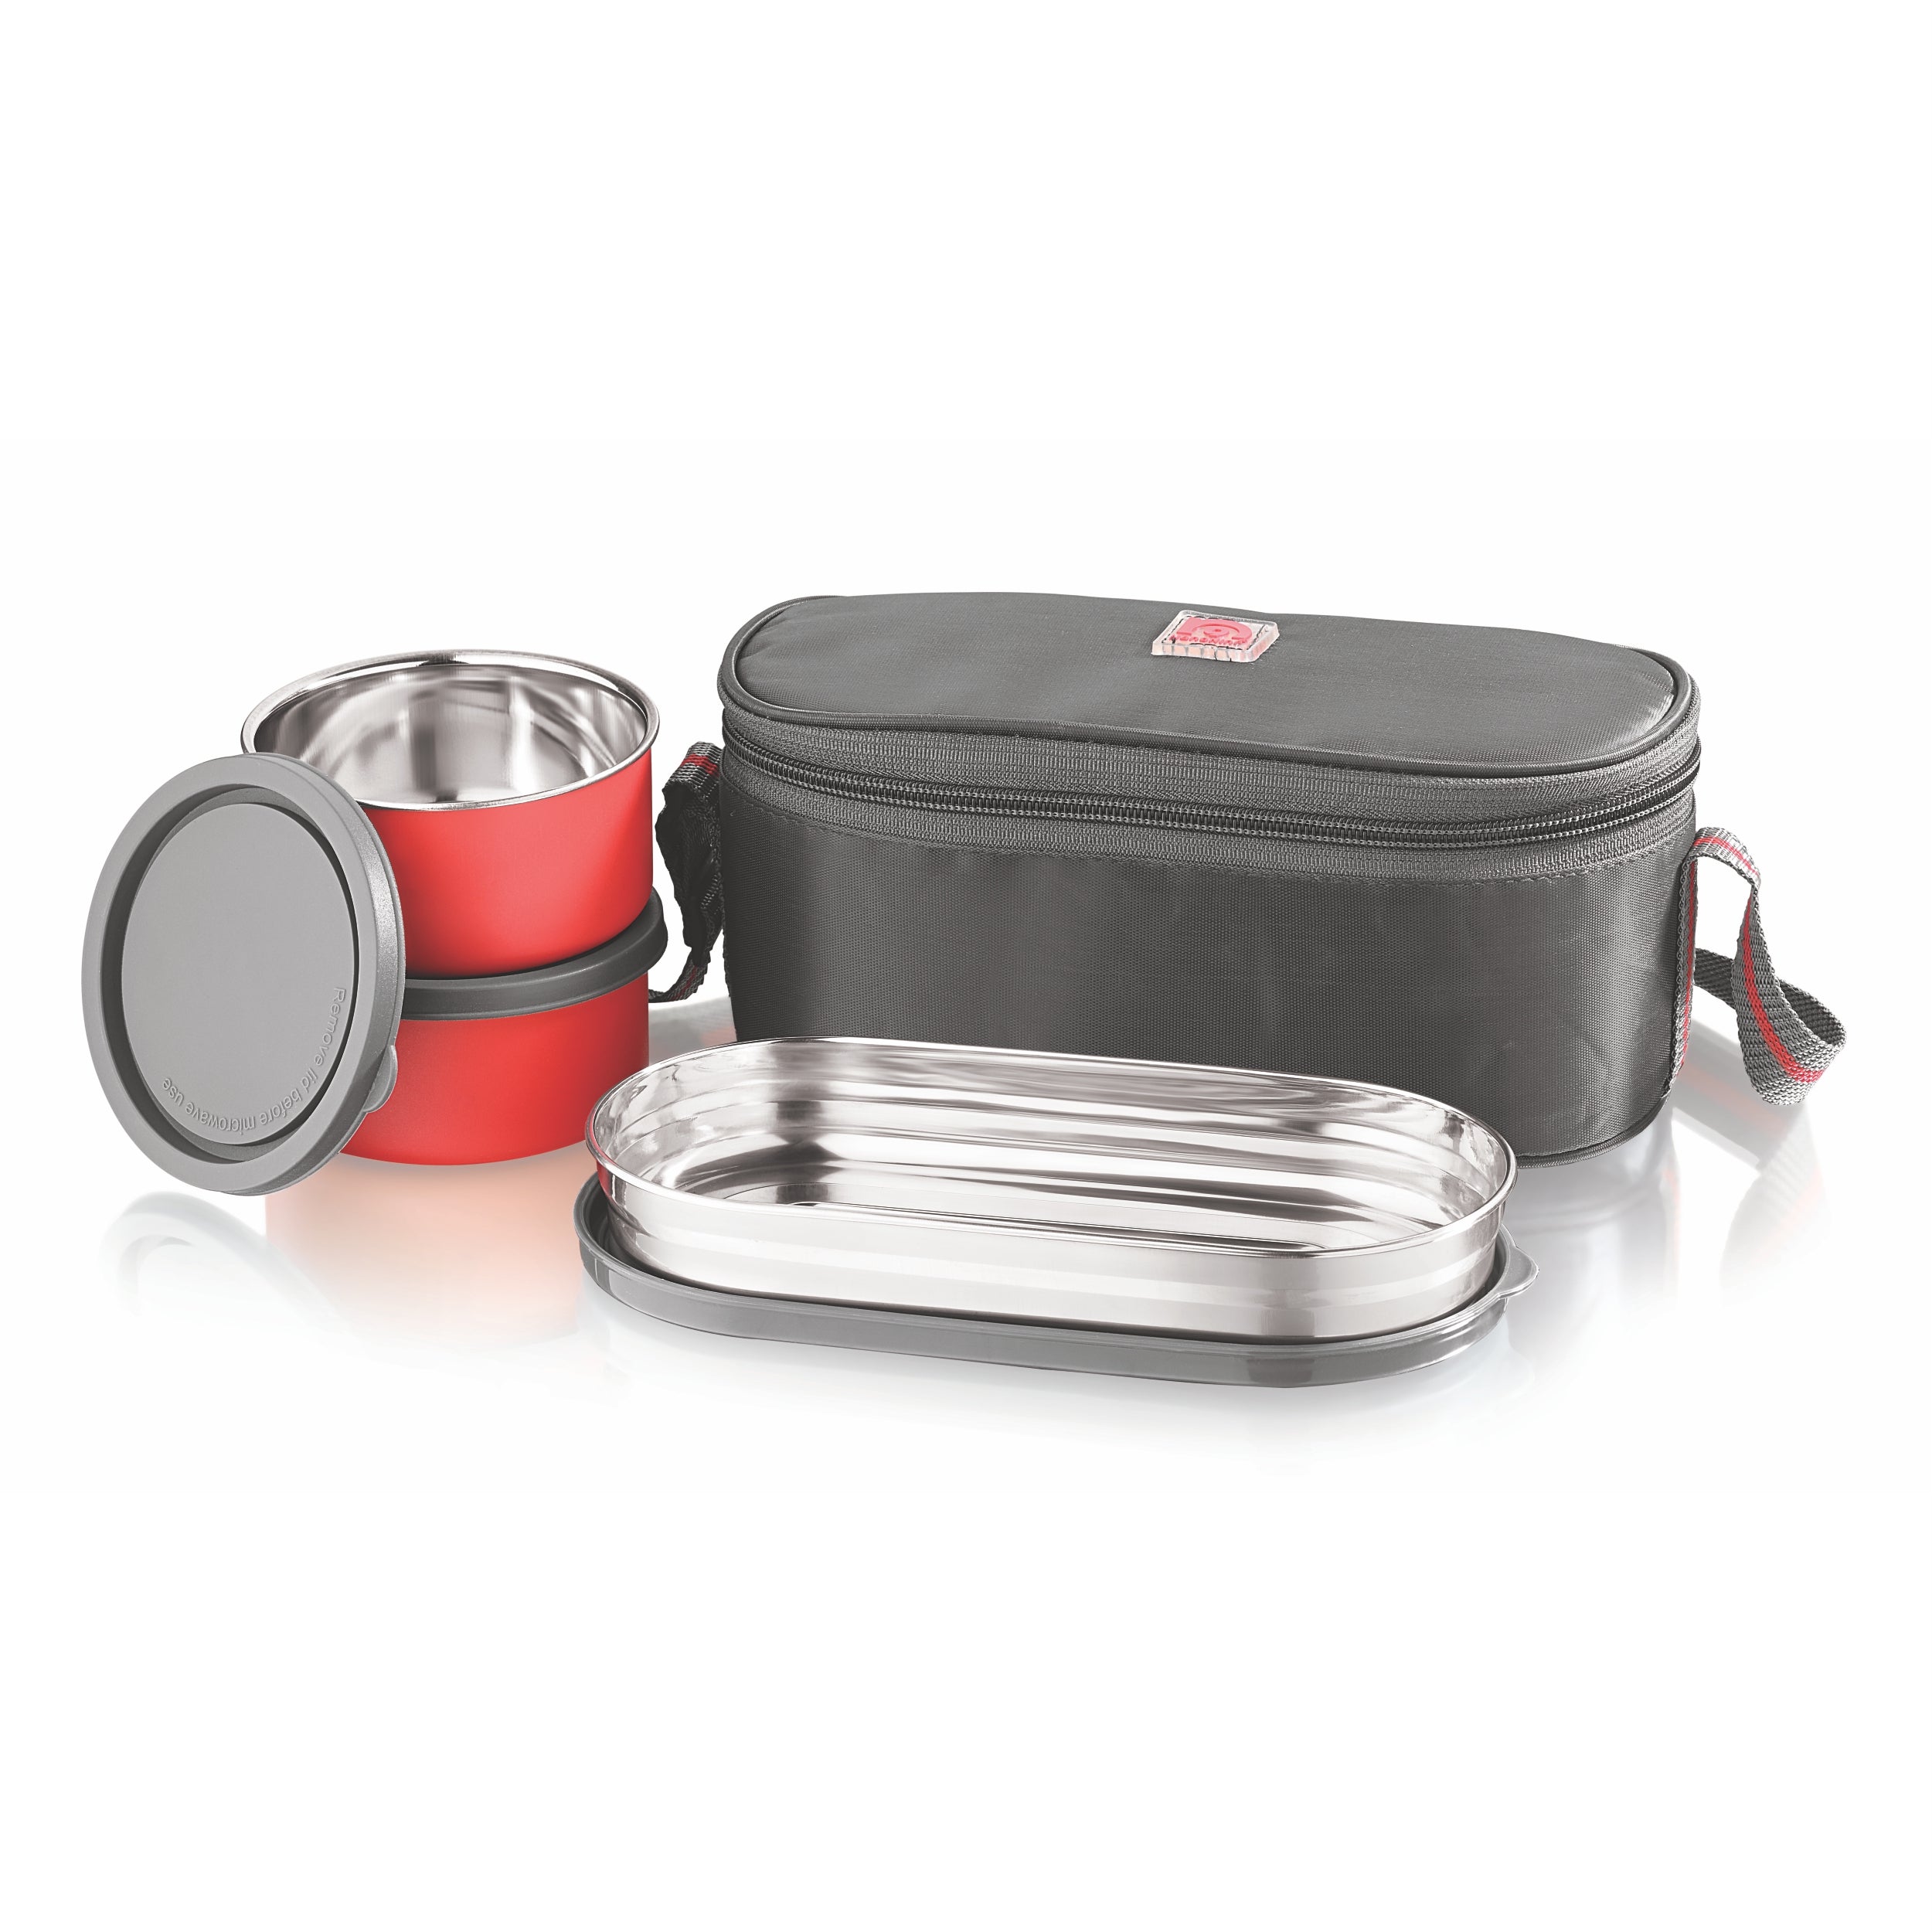 NanoNine Micro Steel Lunch Set: 2 Air-Tight (250ml X 2) Stainless Steel Containers, 1 Chapati Box, and Insulated Bag for Fresh and Delicious Meals On-the-Go